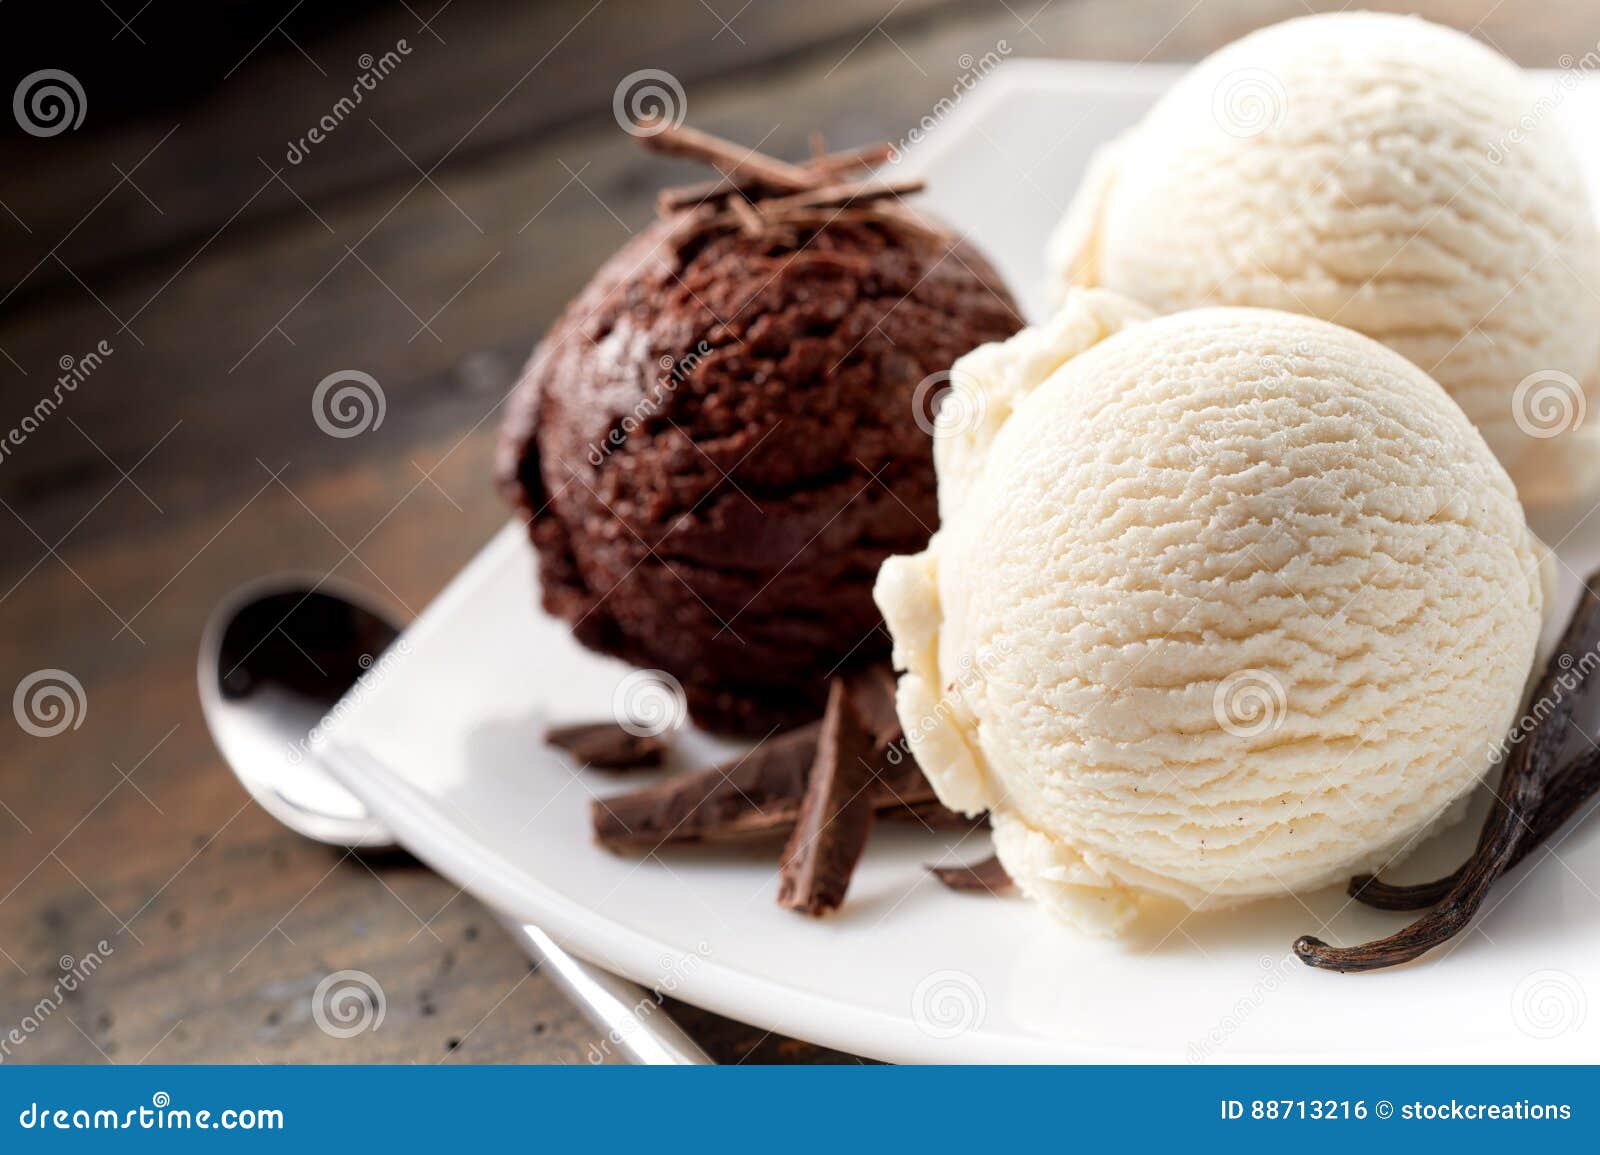 scoops of chocolate and vanilla ice cream on plate